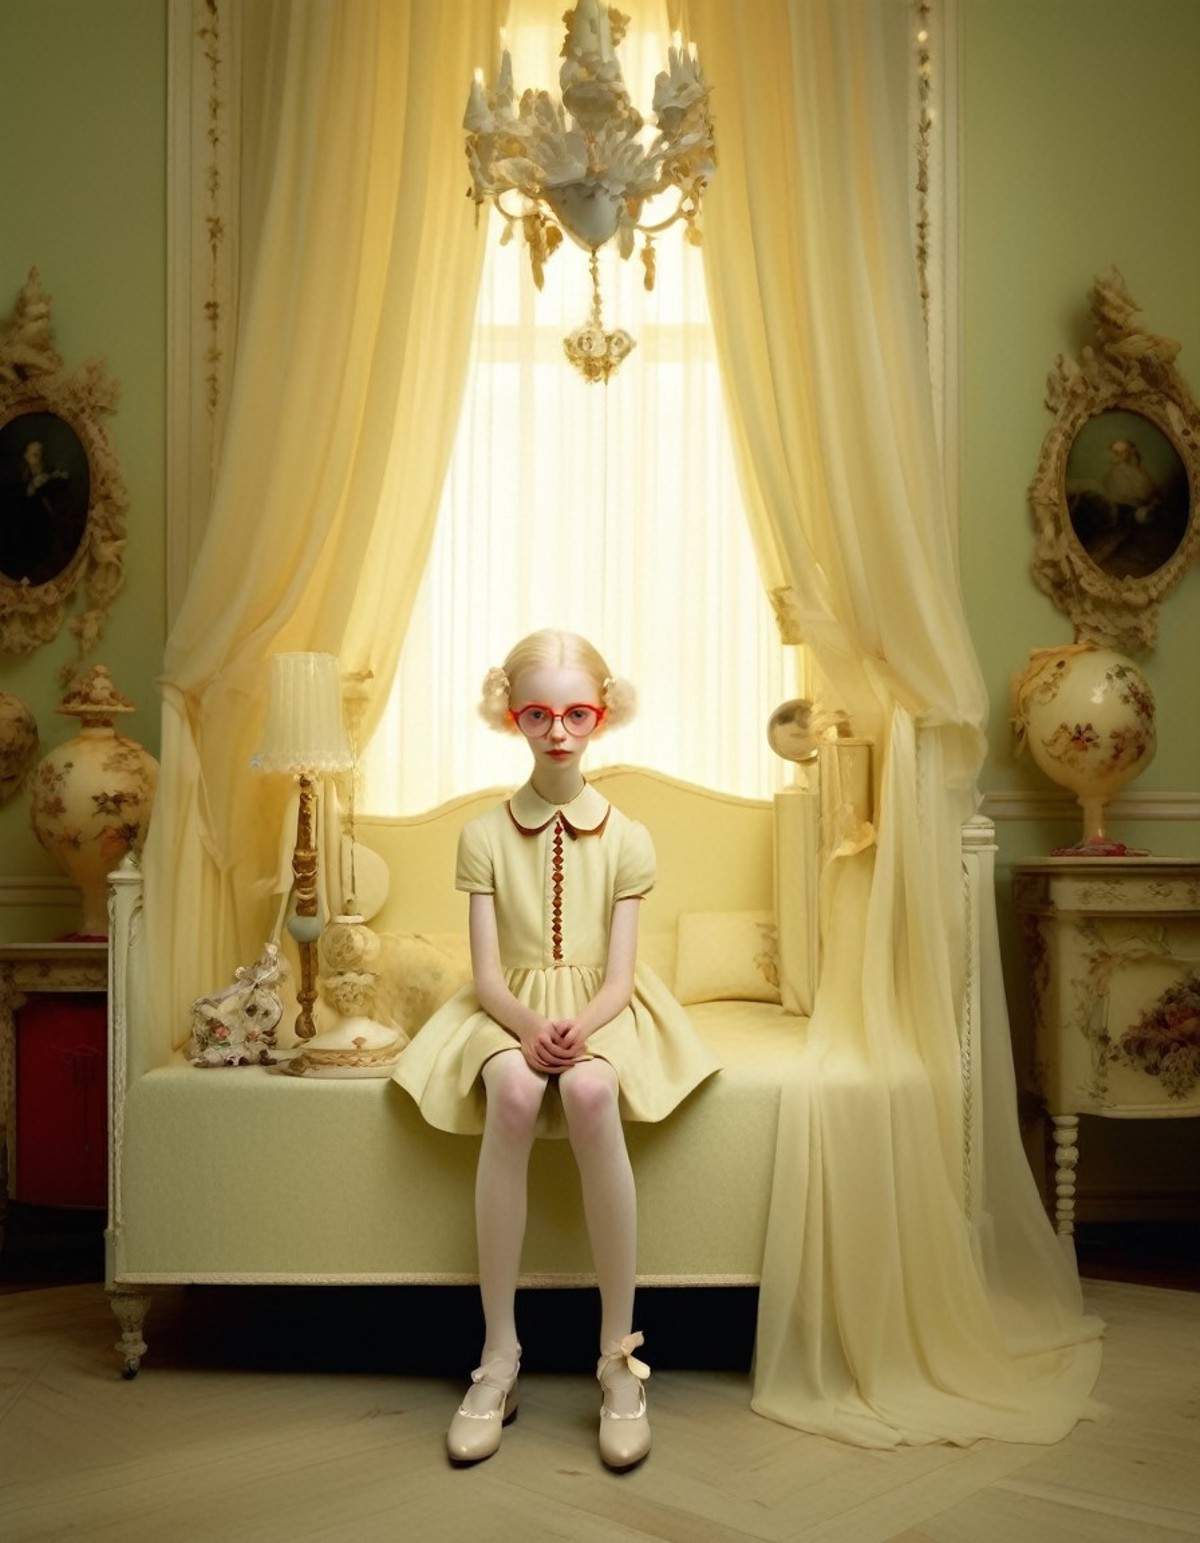 Ray Caesar Style image by redbible